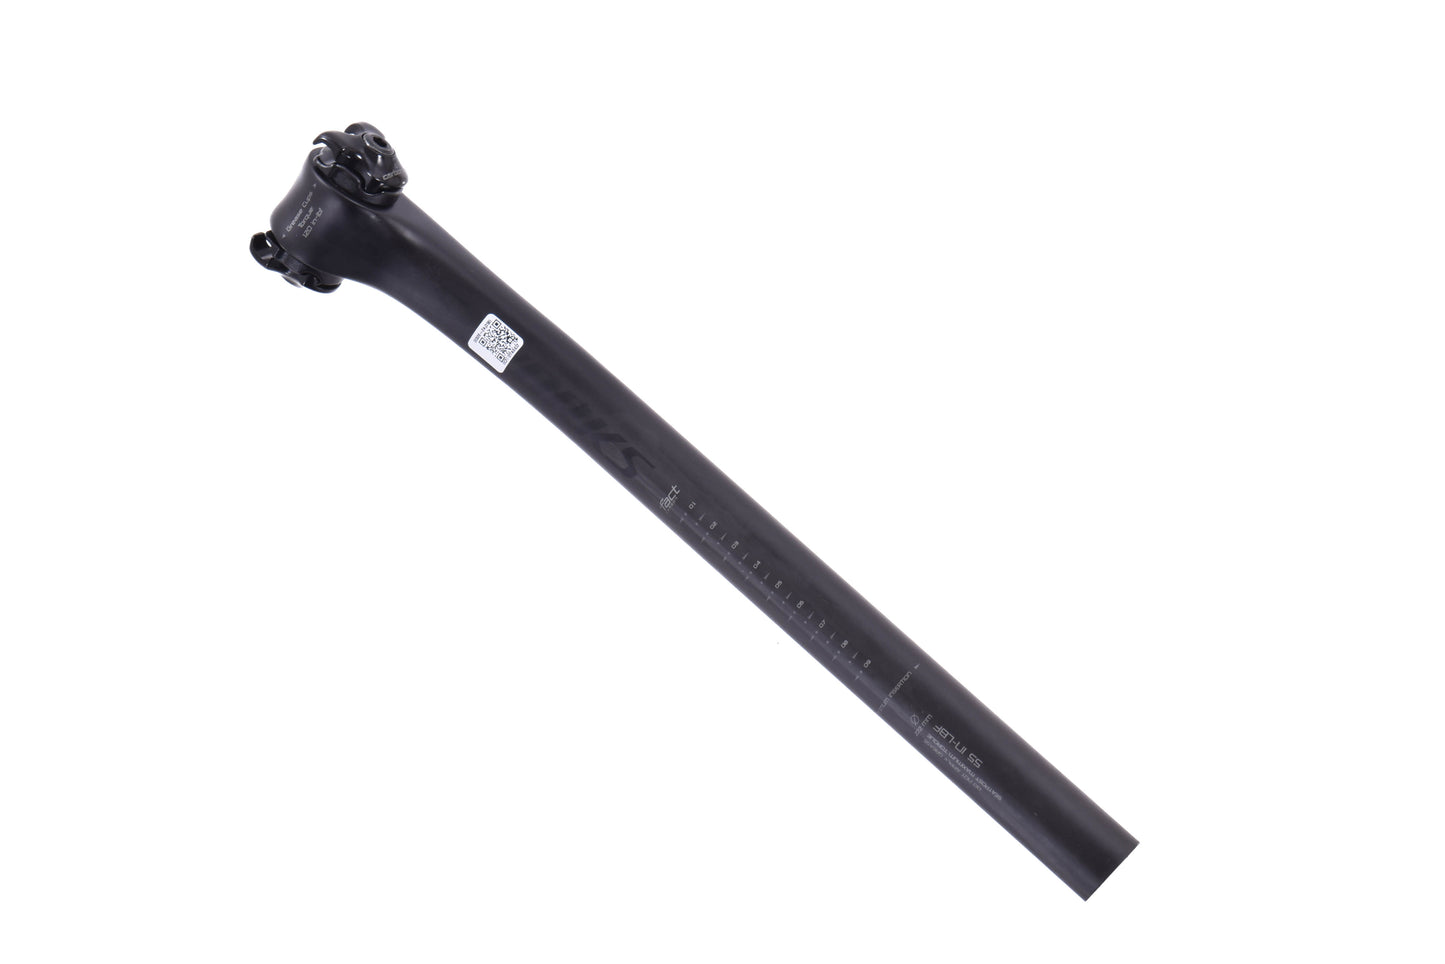 USED Specialized S-Works Carbon Seatpost 27.2mm x 350mm, 20mm Setback, Clamp for 7x9mm Carbon Rails or 7mm Alloy Rails